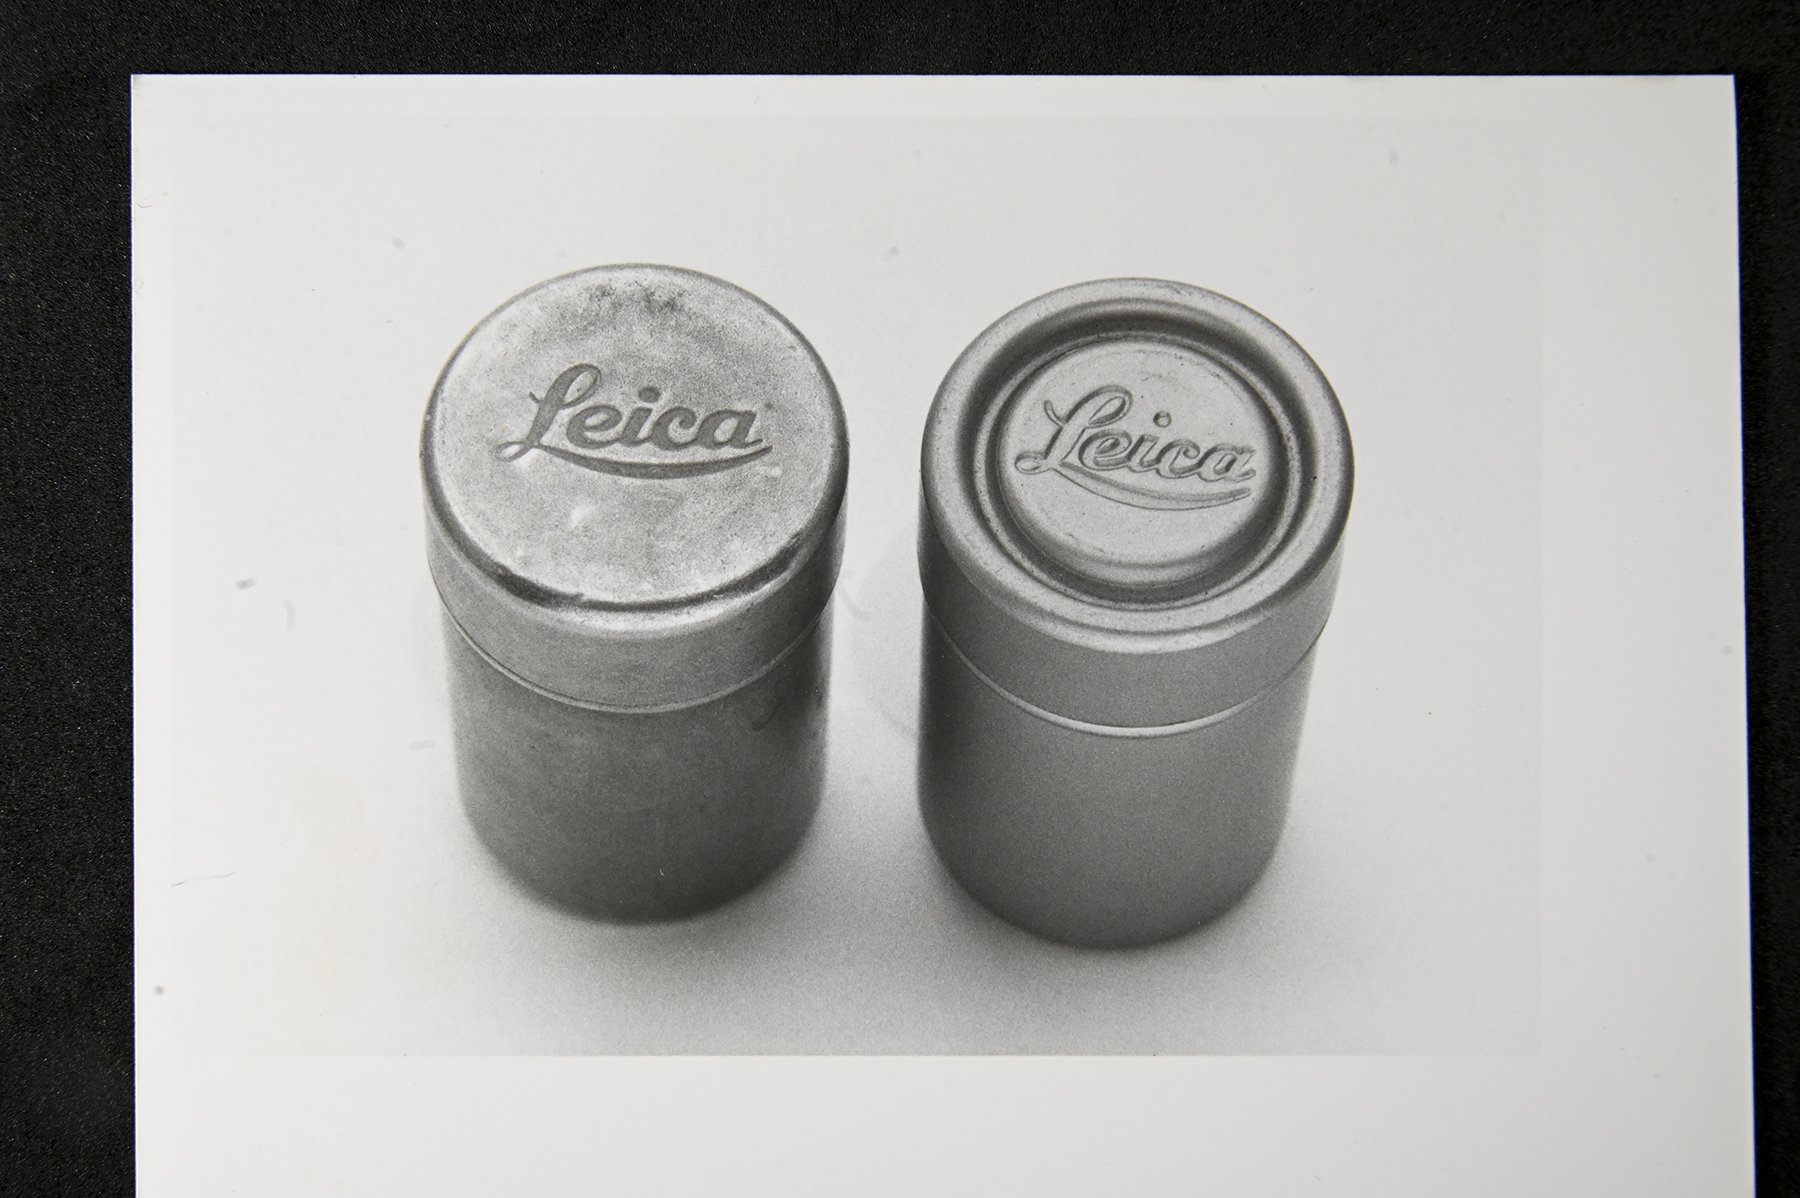 Two types of metal cans for Leica cassette